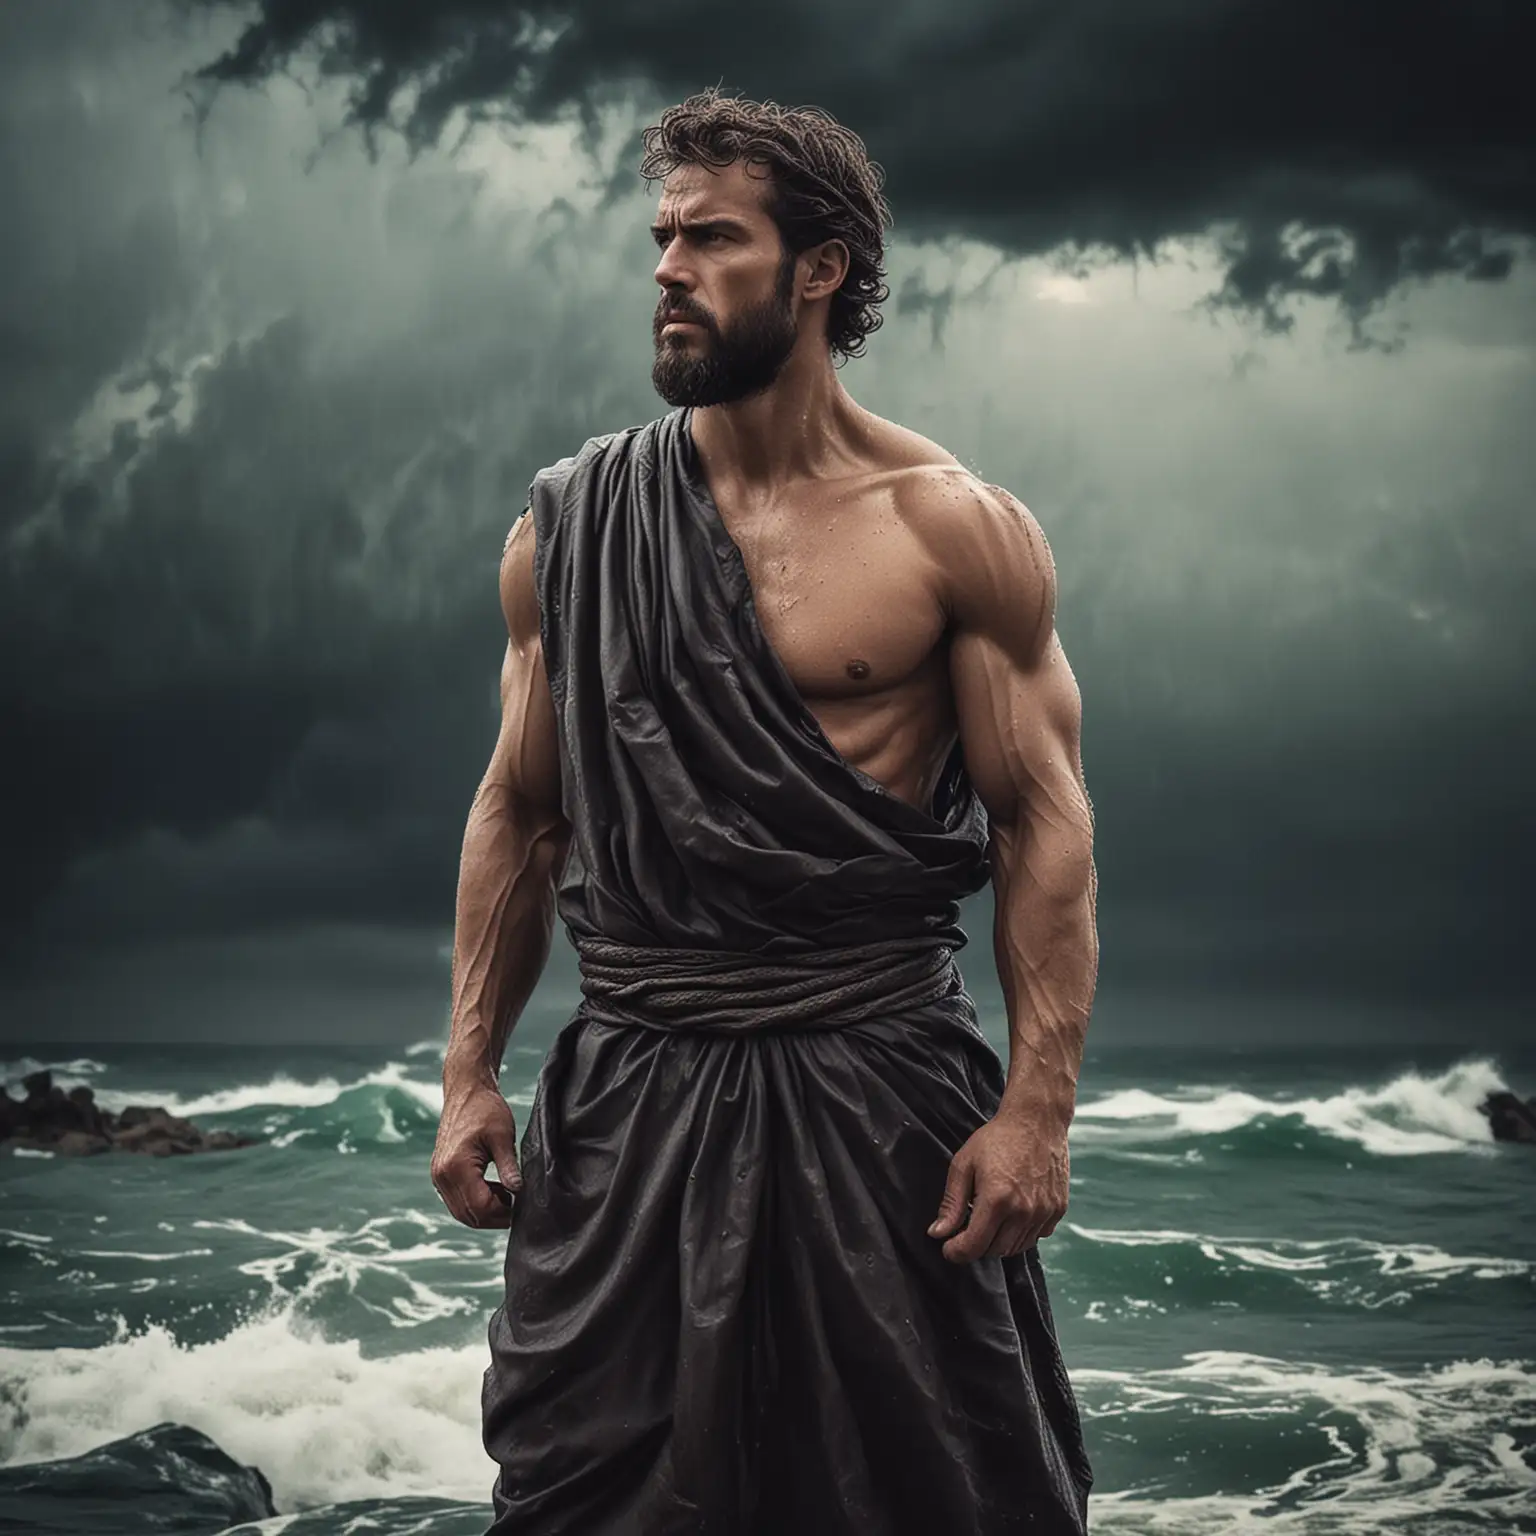 : Visualize a stoic philosopher standing tall amidst a storm, symbolizing resilience in the face of adversity.
Image Description: In this image, a stoic philosopher with a lean and muscular build stands confidently with a serene expression on his face, despite the turbulent storm raging around him. His posture exudes strength and determination as he calmly faces the challenges ahead, embodying the principles of resilience and inner strength.